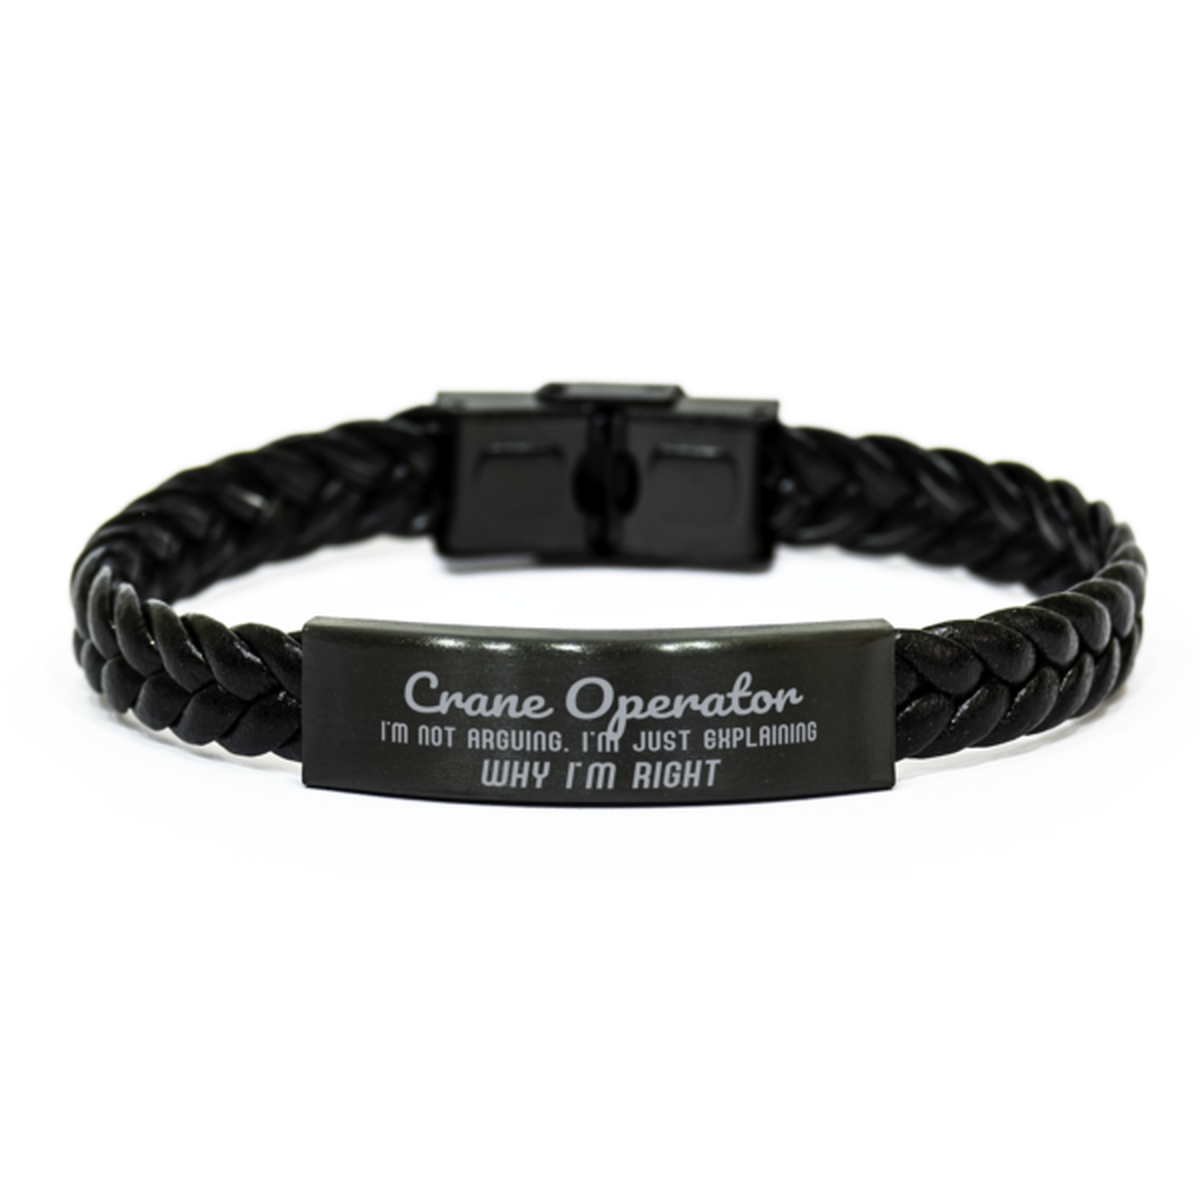 Crane Operator I'm not Arguing. I'm Just Explaining Why I'm RIGHT Braided Leather Bracelet, Graduation Birthday Christmas Crane Operator Gifts For Crane Operator Funny Saying Quote Present for Men Women Coworker